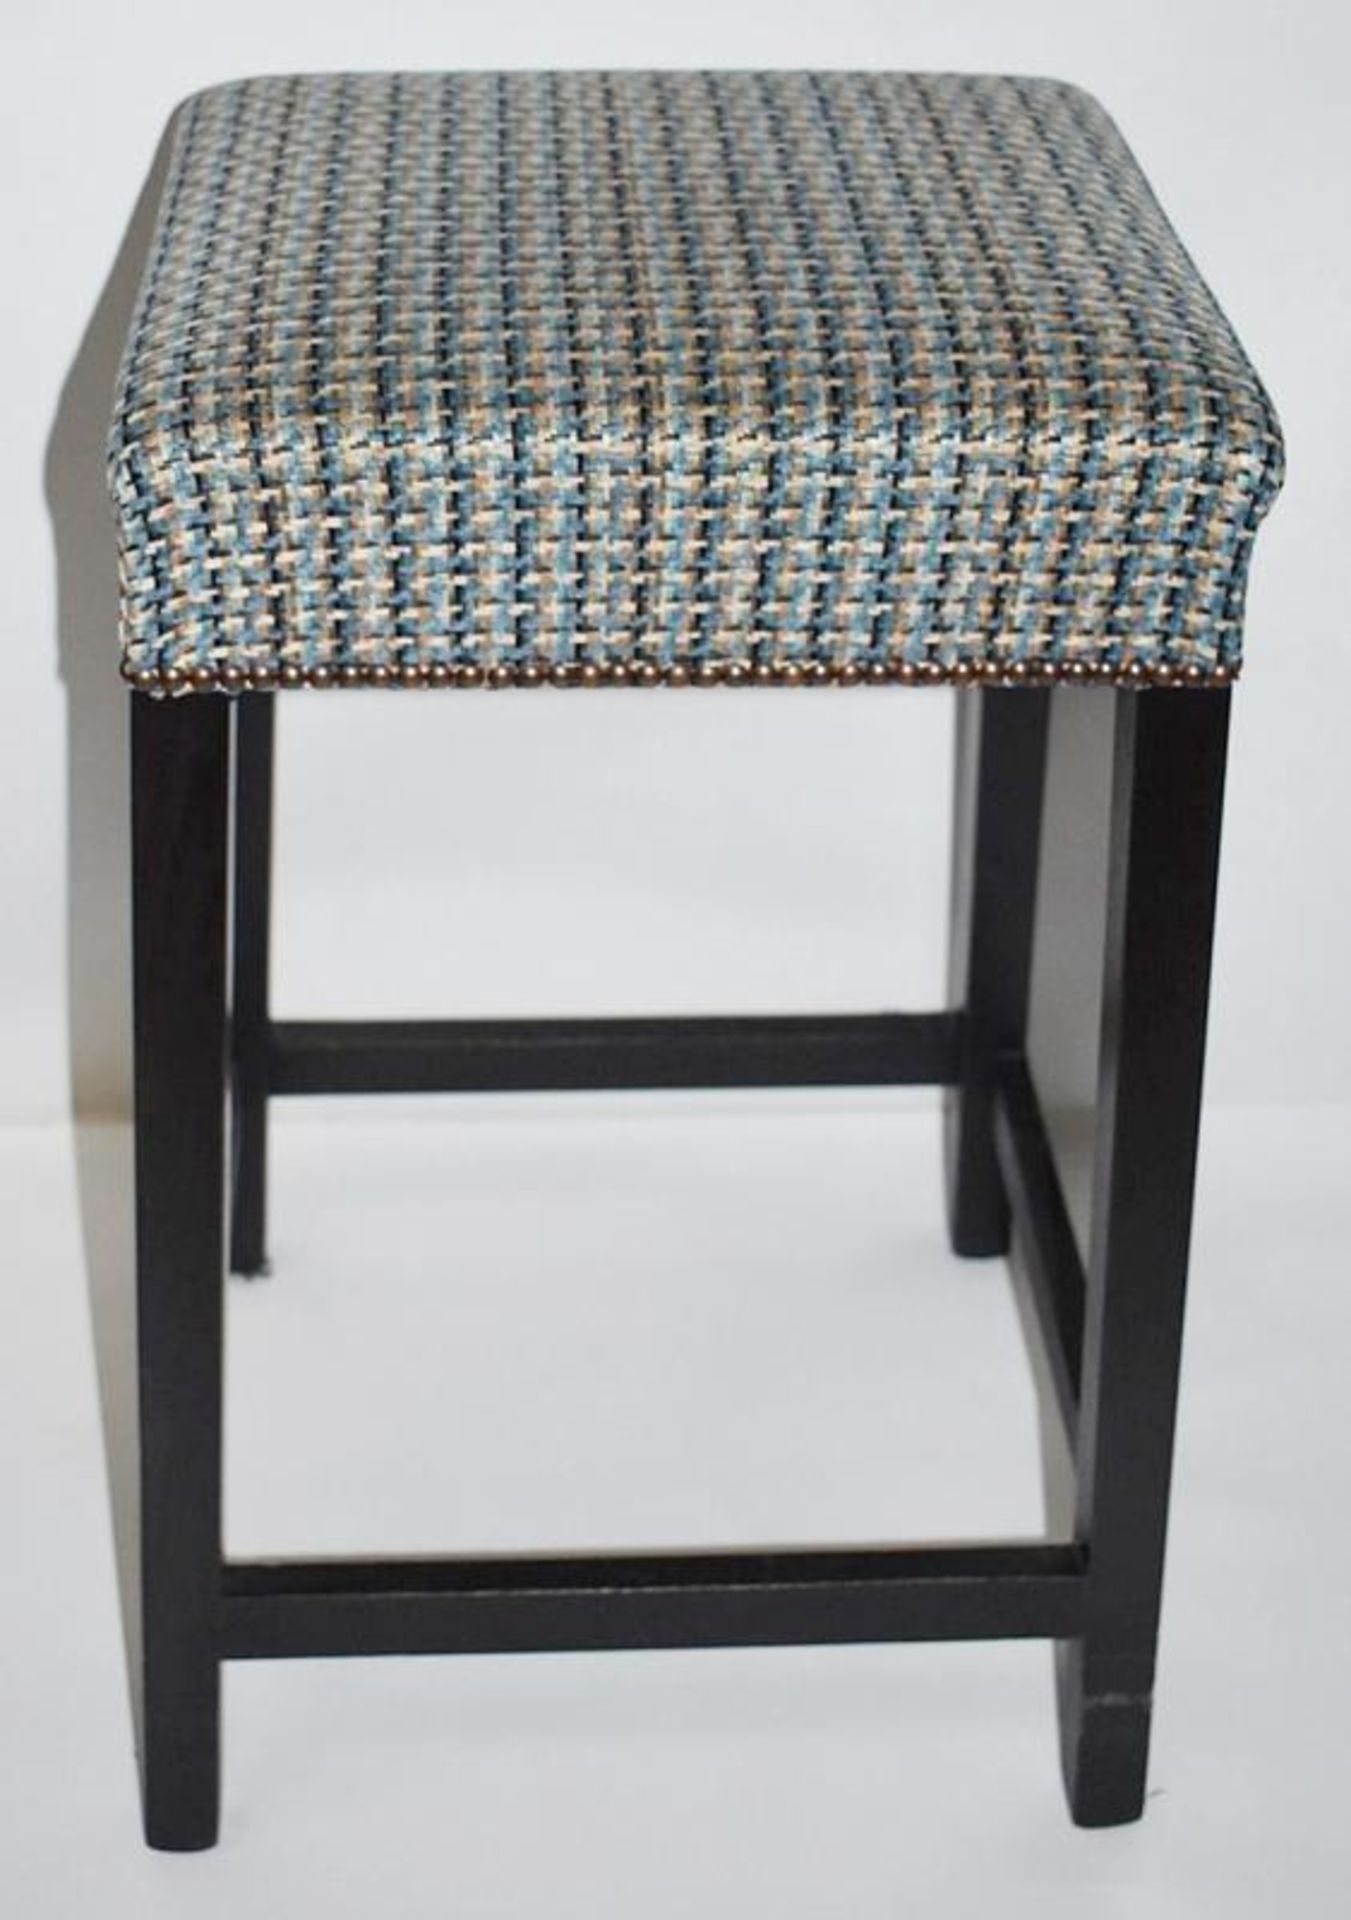 1 x Contemporary Bar Stool Upholstered In A Chic Designer Fabric - Recently Removed From A Famous De - Image 5 of 7